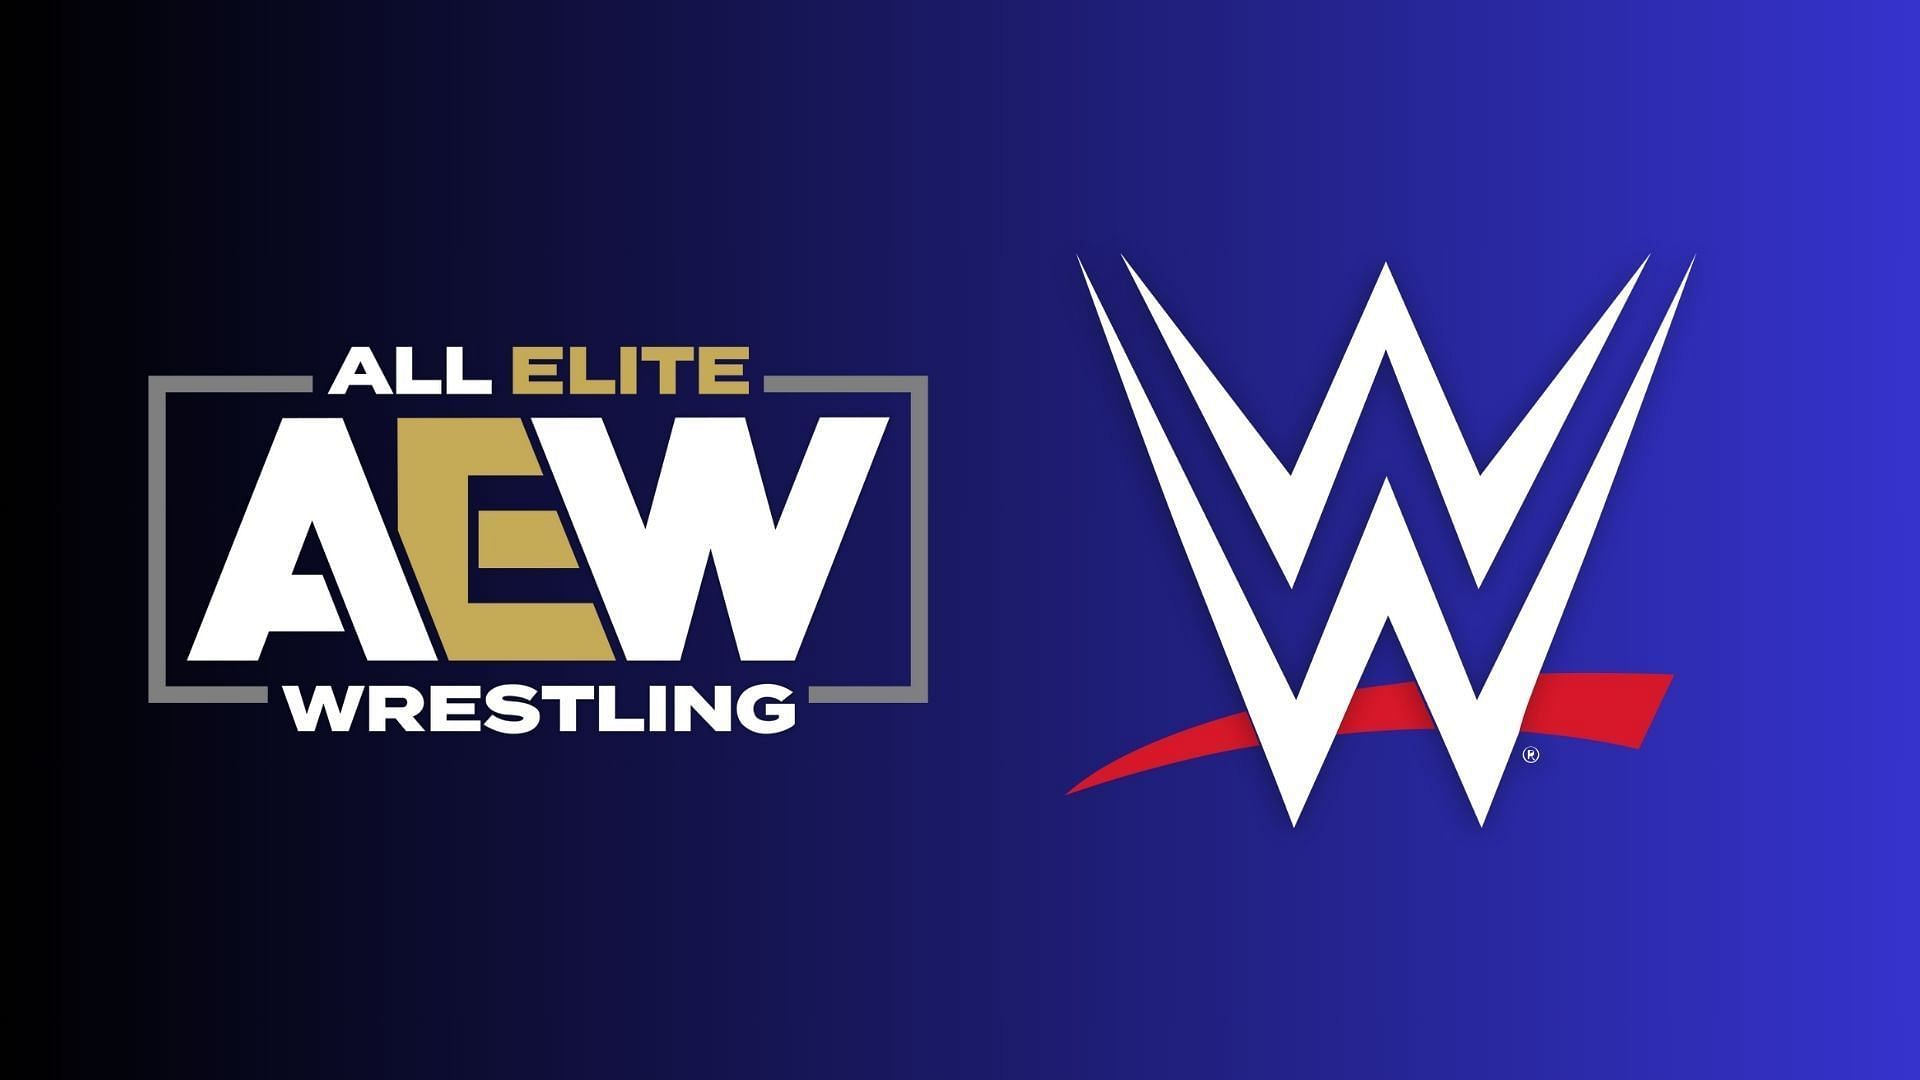 A top AEW star is set to join WWE soon.